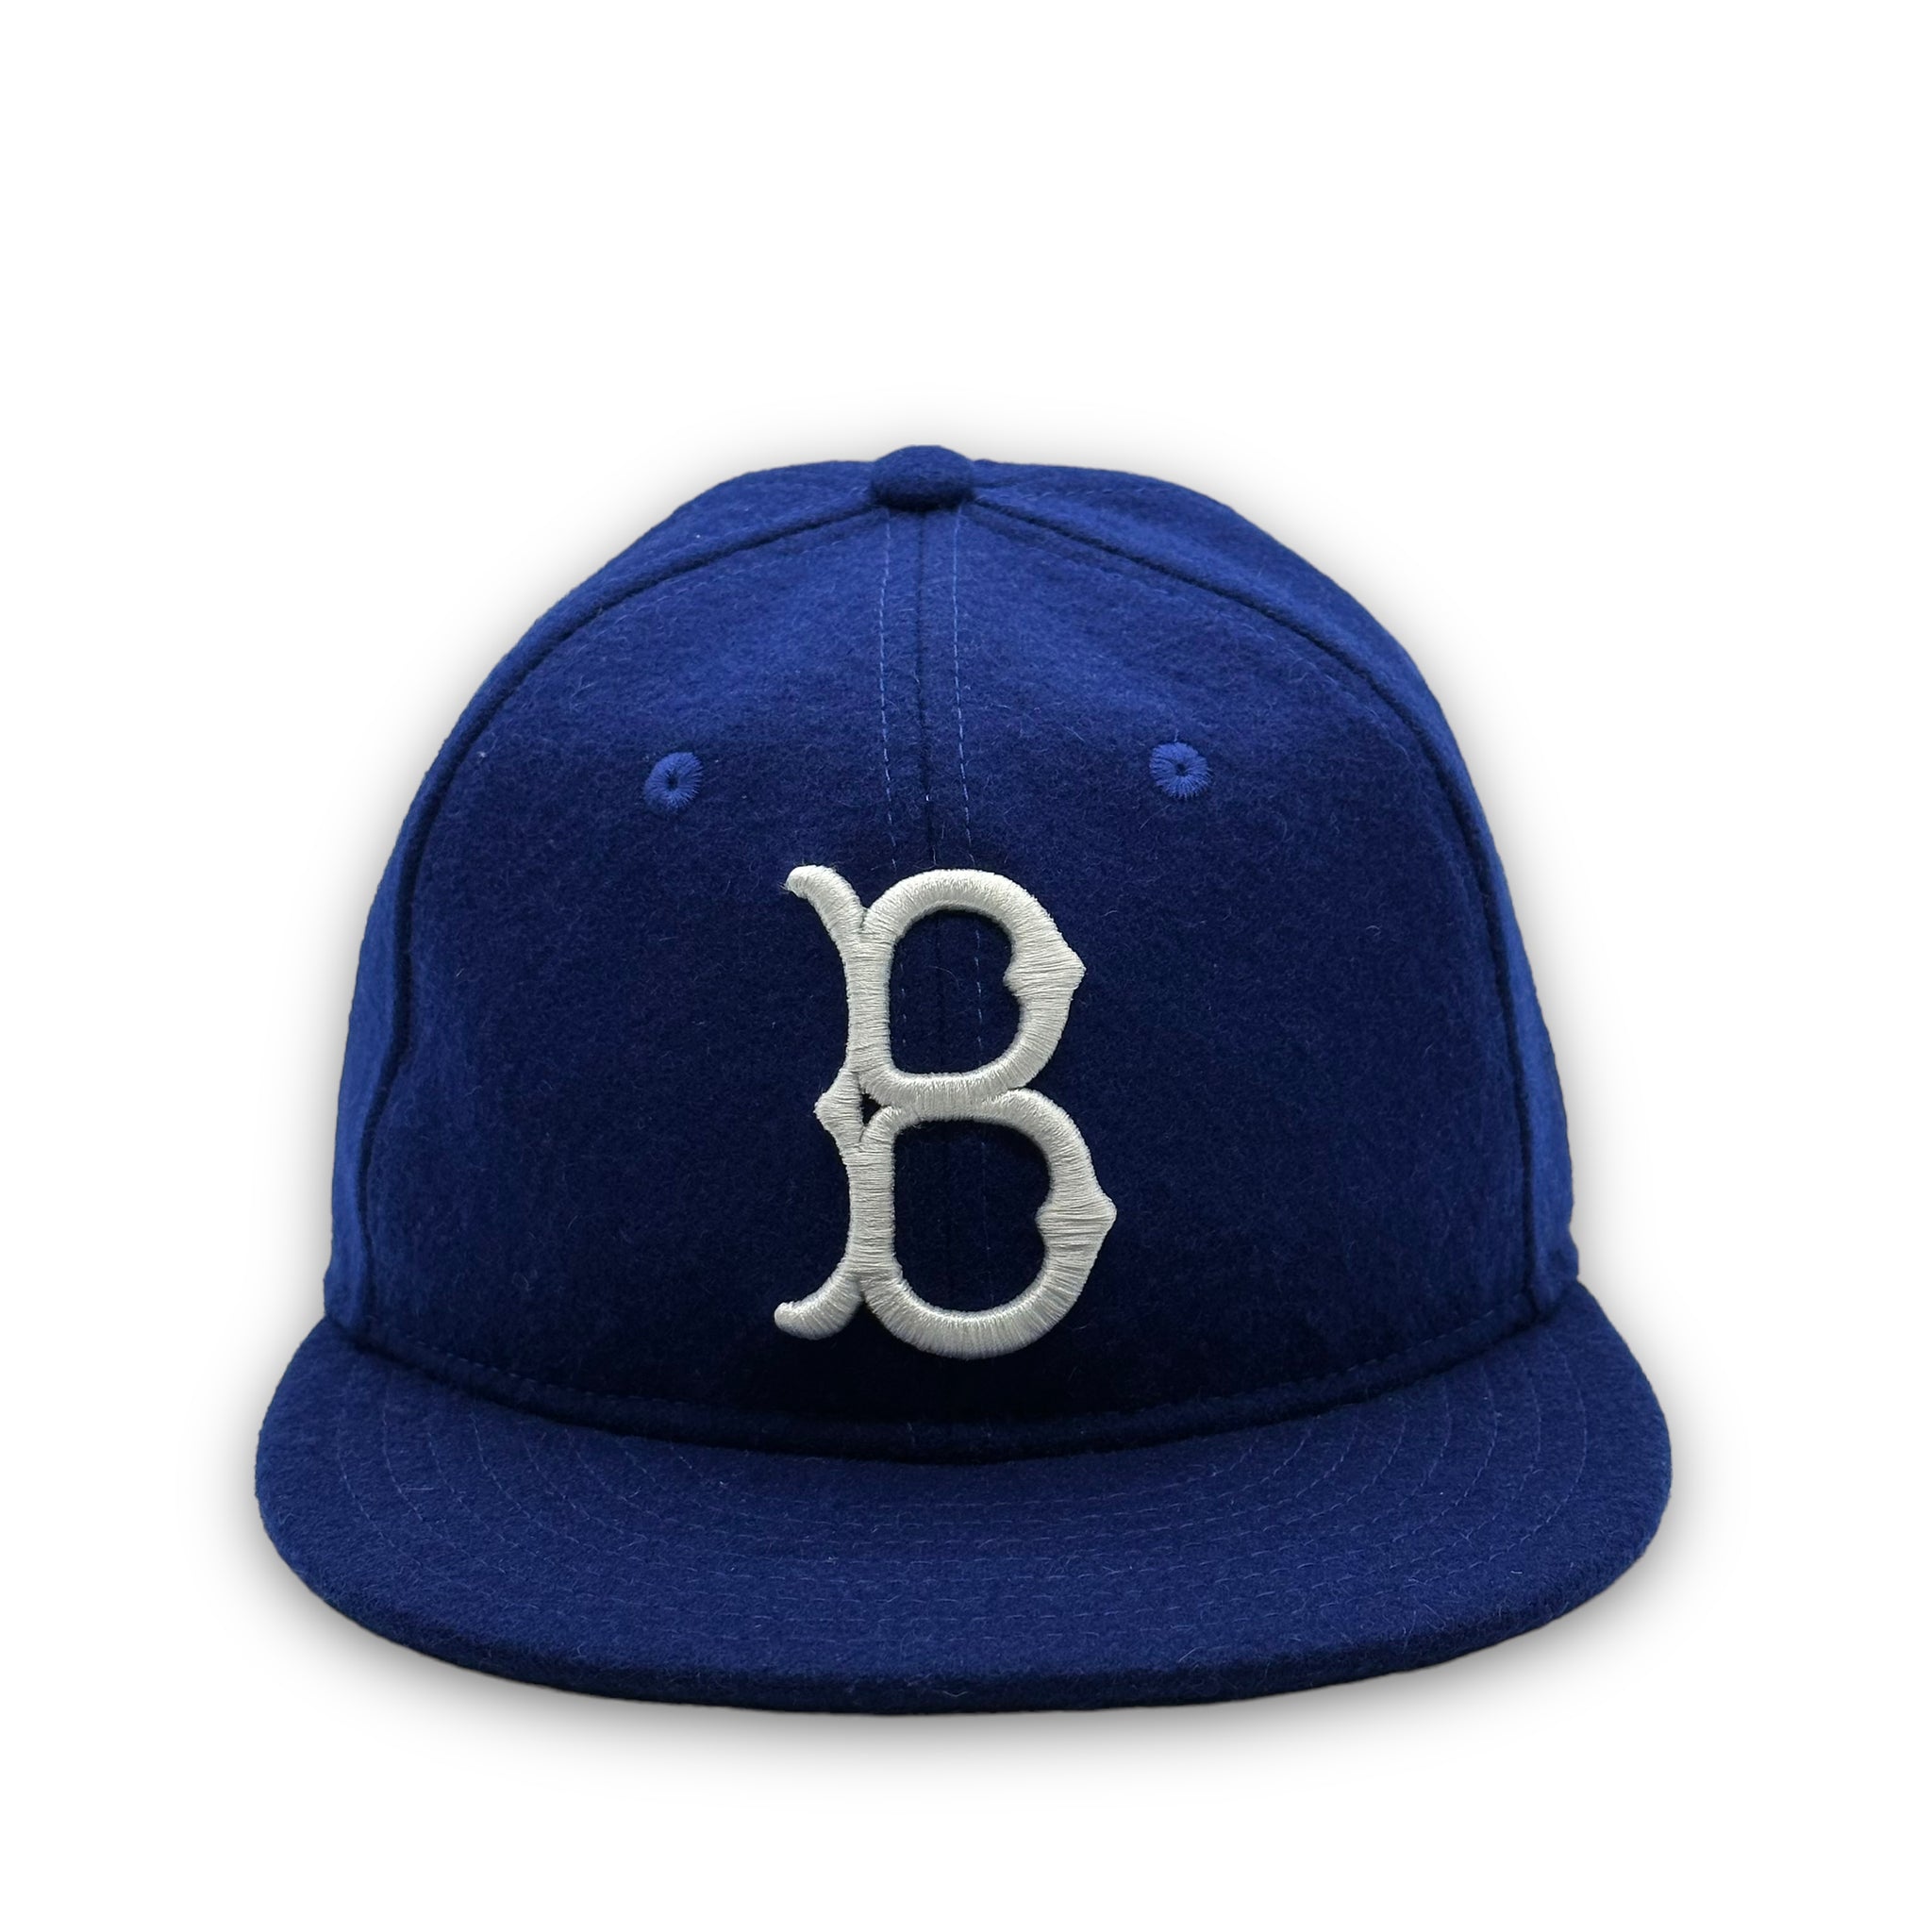 New Era 59FIFTY Retro On-Field Los Angeles Dodgers Game Hat - Royal, White Royal / 7 1/2